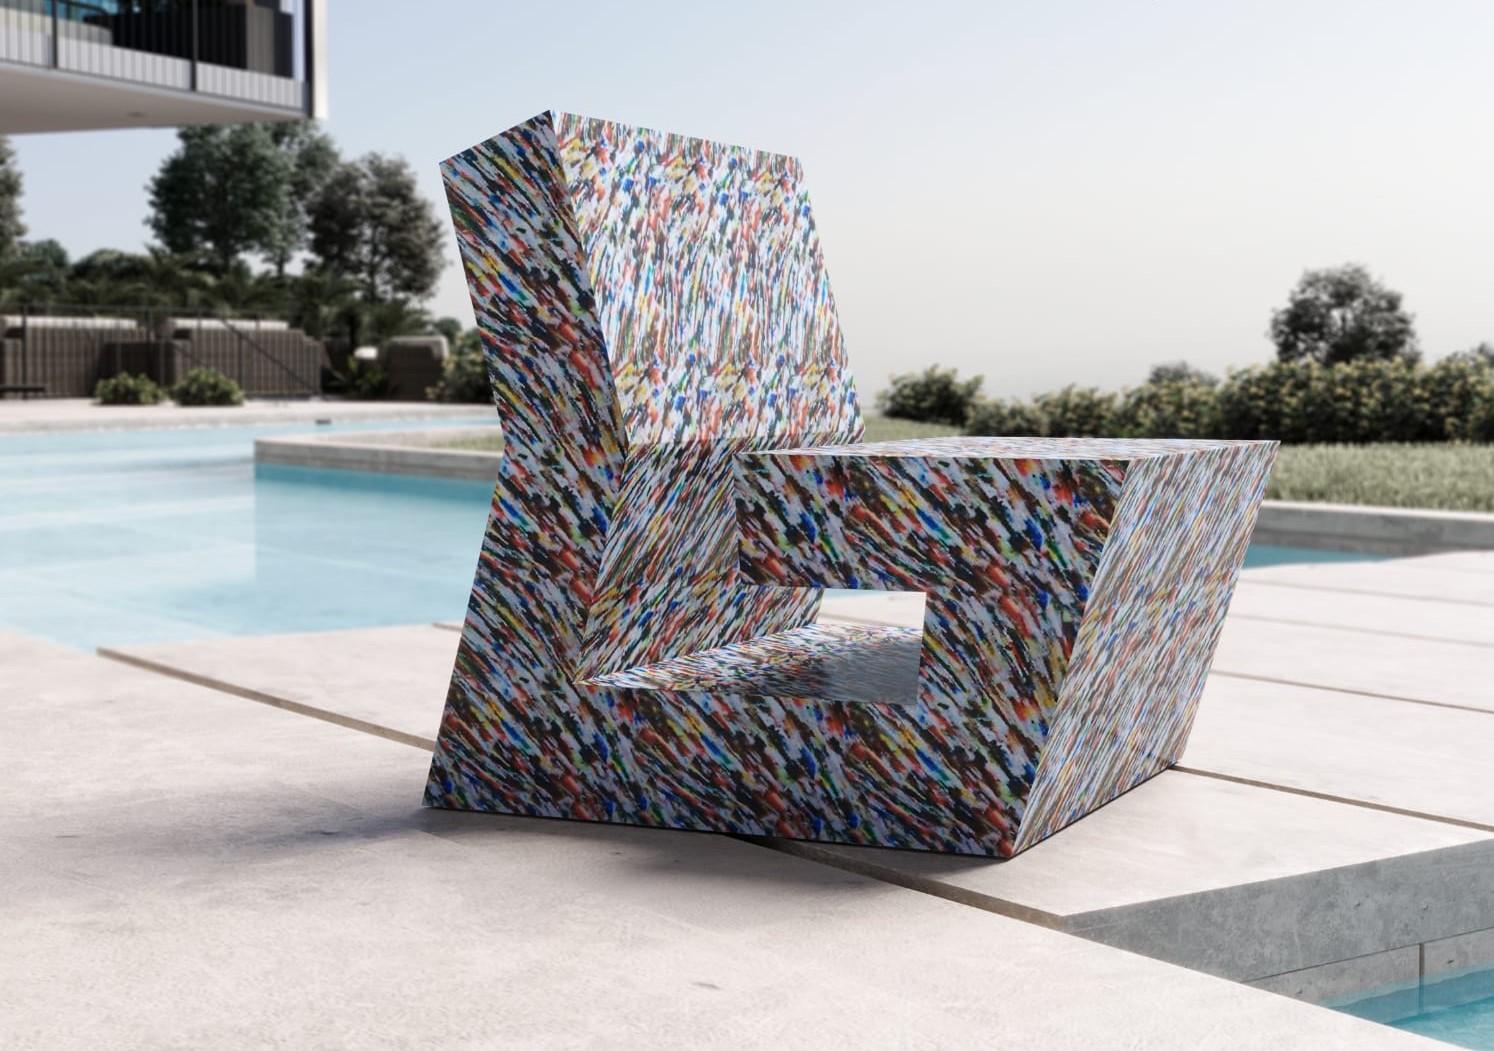 Wood Labirint sofa by Andrea Giomi
Dimensions: D 80 x W 60 x H 84 cm
Materials: painted wood.

Andrea Giomi, was born in Castelfiorentino in the province of Florence in
1970. Develops his training and experience in the world of furniture as a